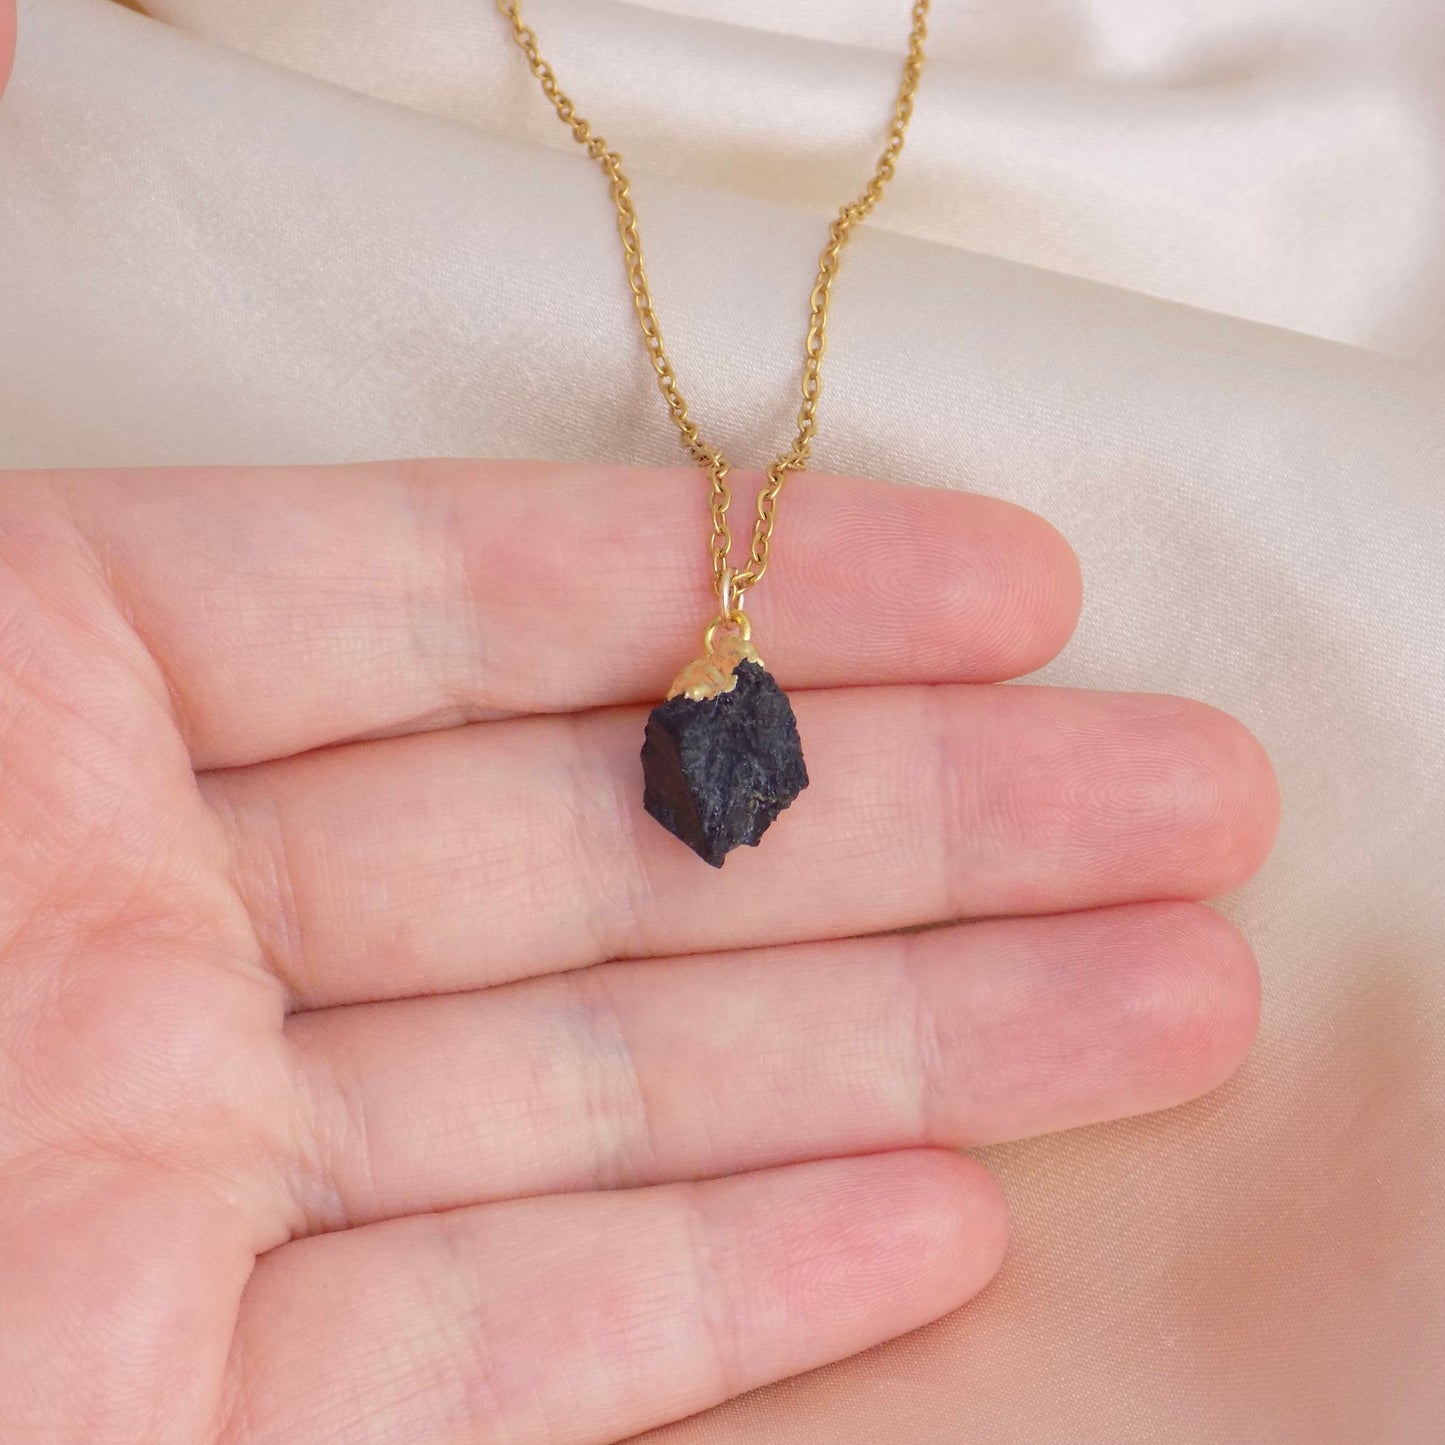 Small Raw Black Tourmaline Necklace on 18K Gold Stainless Steel Chain, M6-714